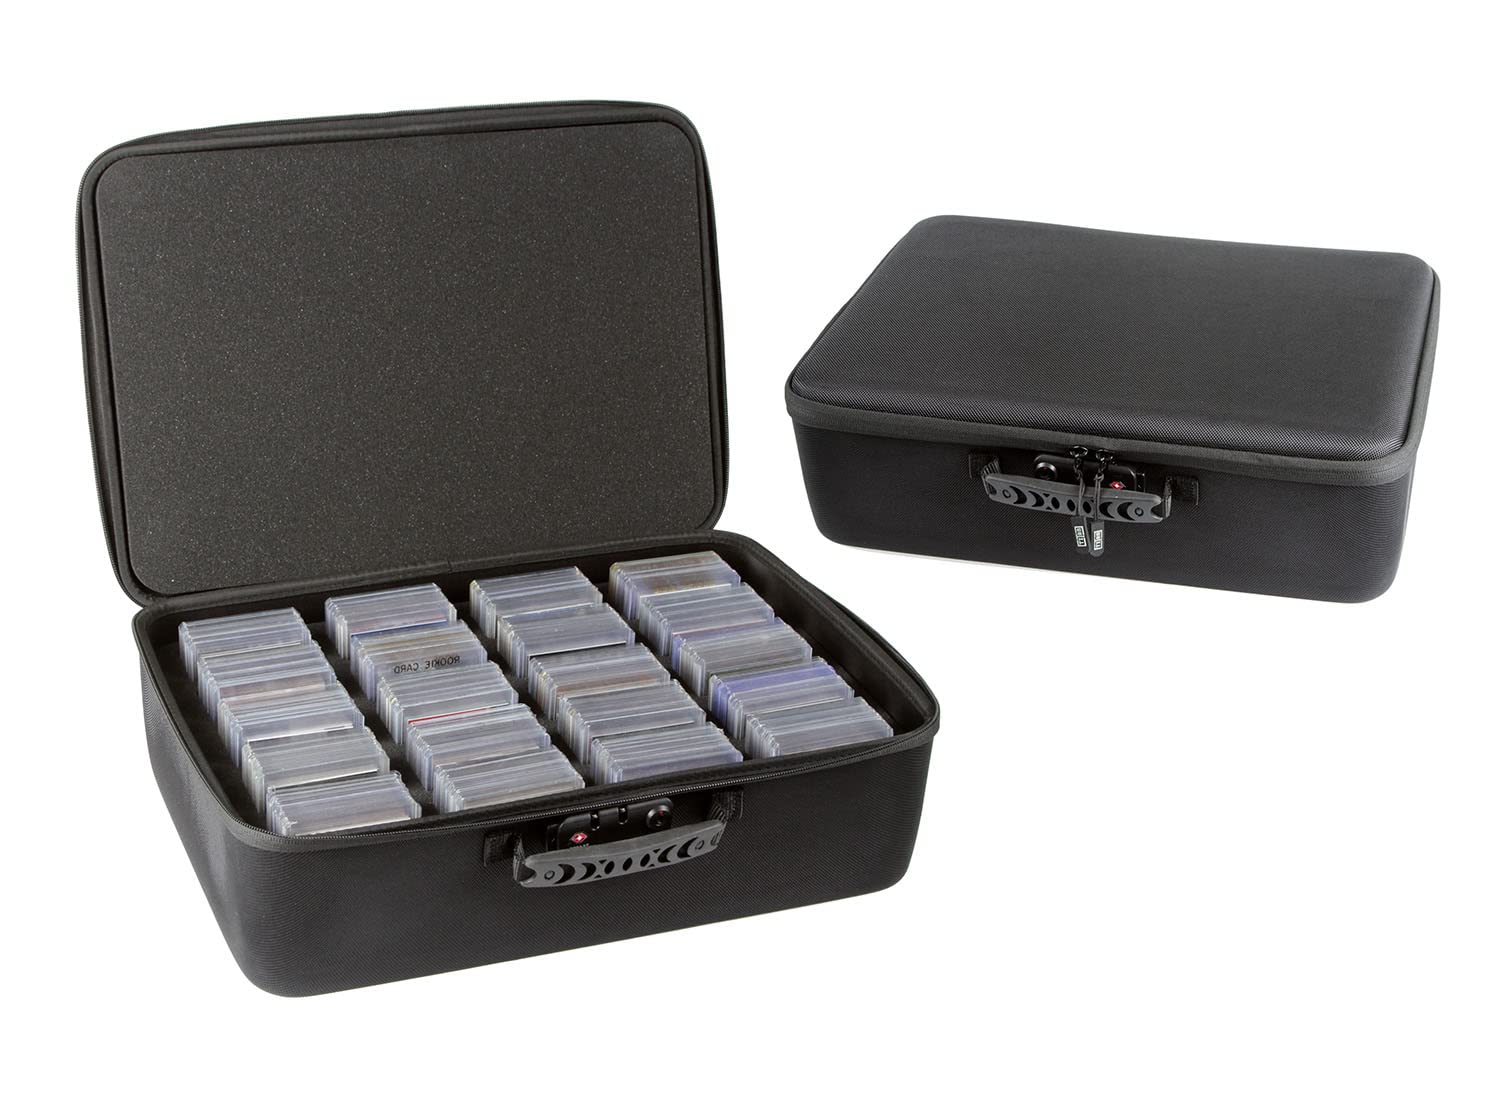 card Titan Pro Toploader Storage Box and One Touch Sports card Storage case with Zipper Lock - Trading card Storage Box Fits up